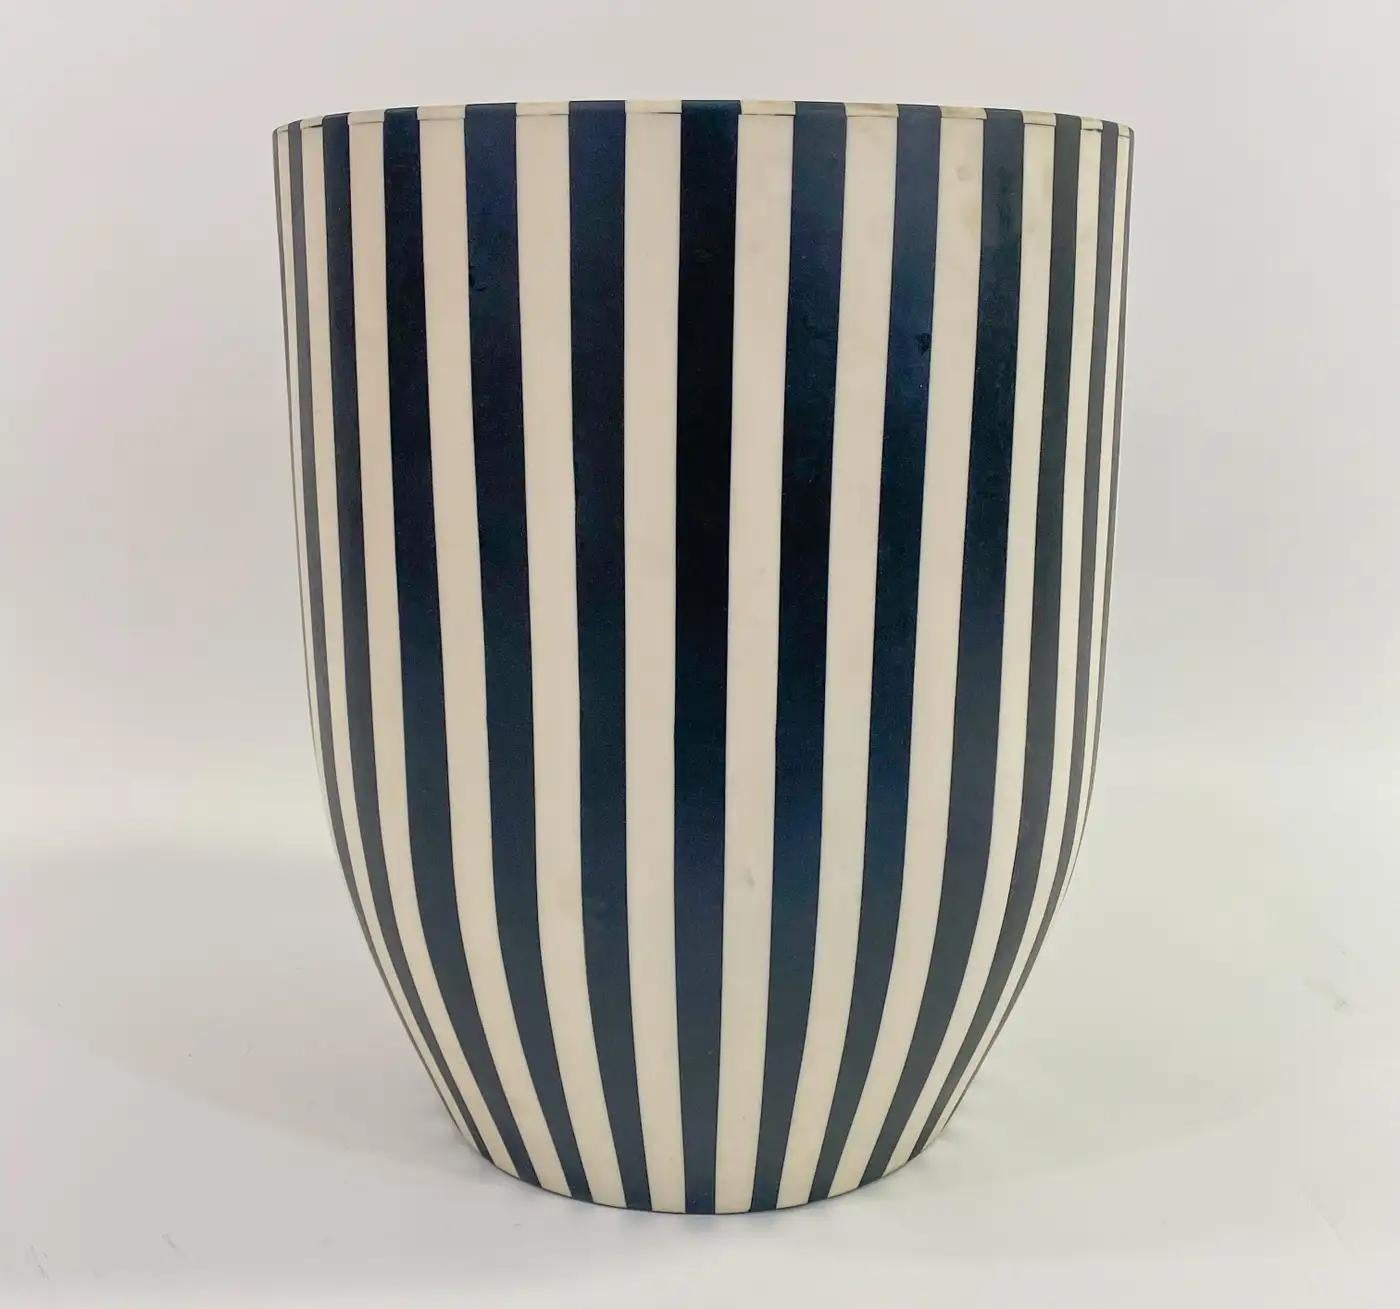 A one of kind Art Deco style black and white side table or stool featuring a striped design. The table is made of quality resin and have a solid and sturdy structure. The sculptural cylindric shaped table has a round top and and narrow base making